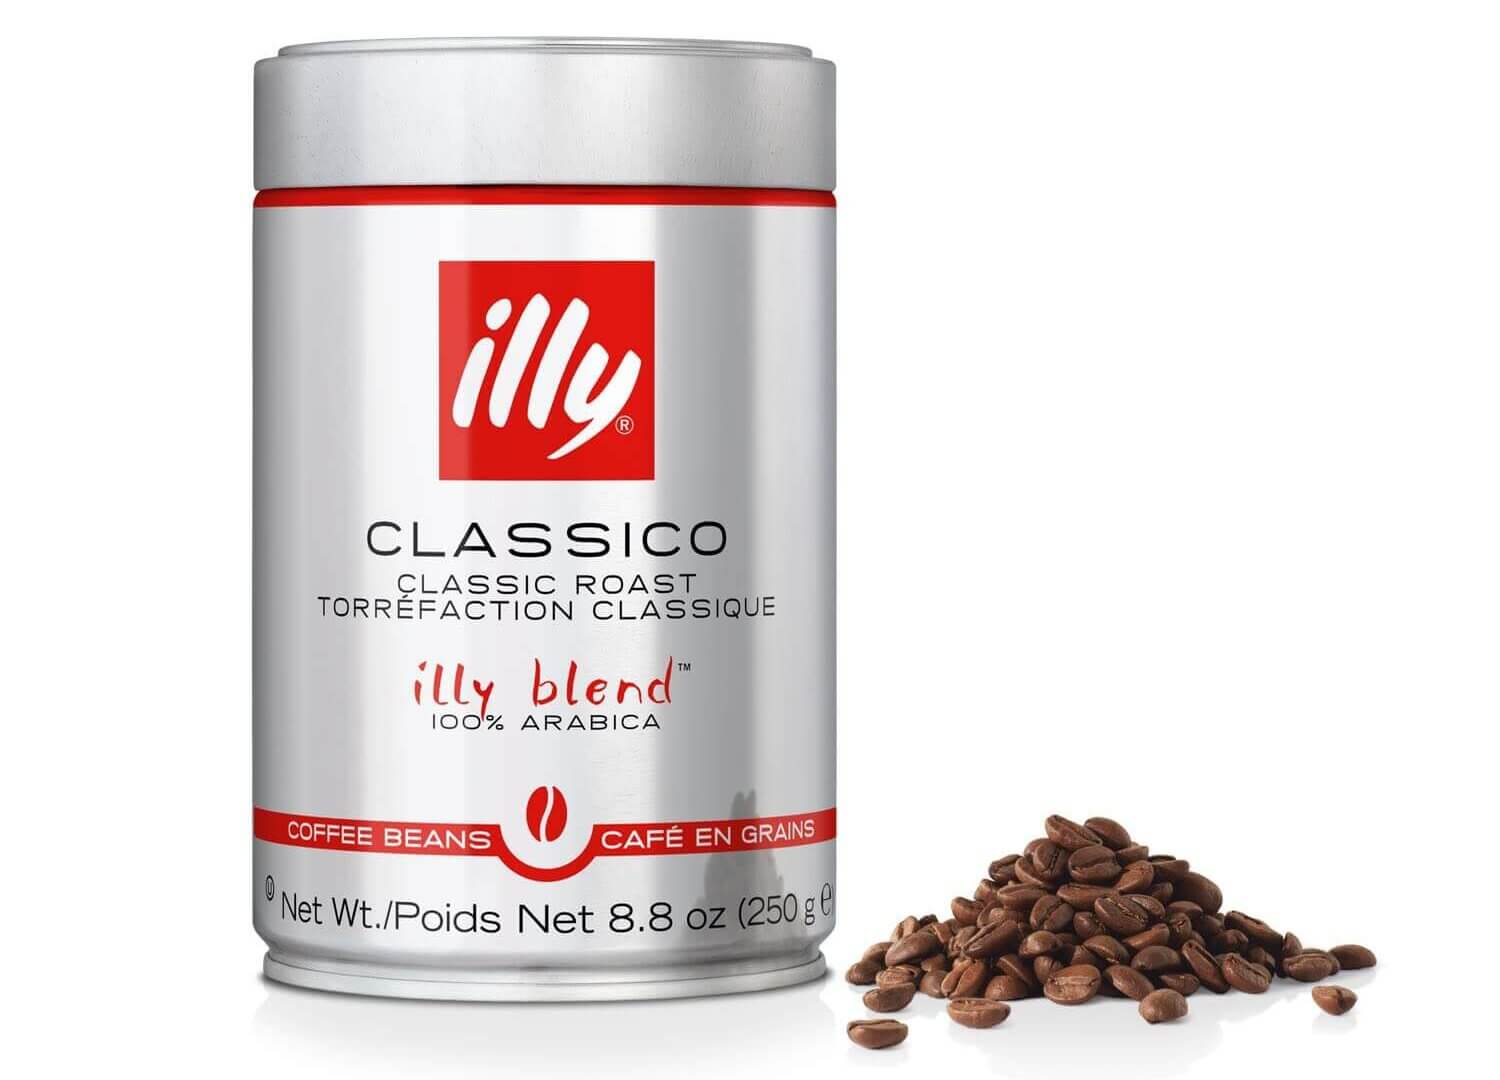 Classic Roast Illy Coffee Beans